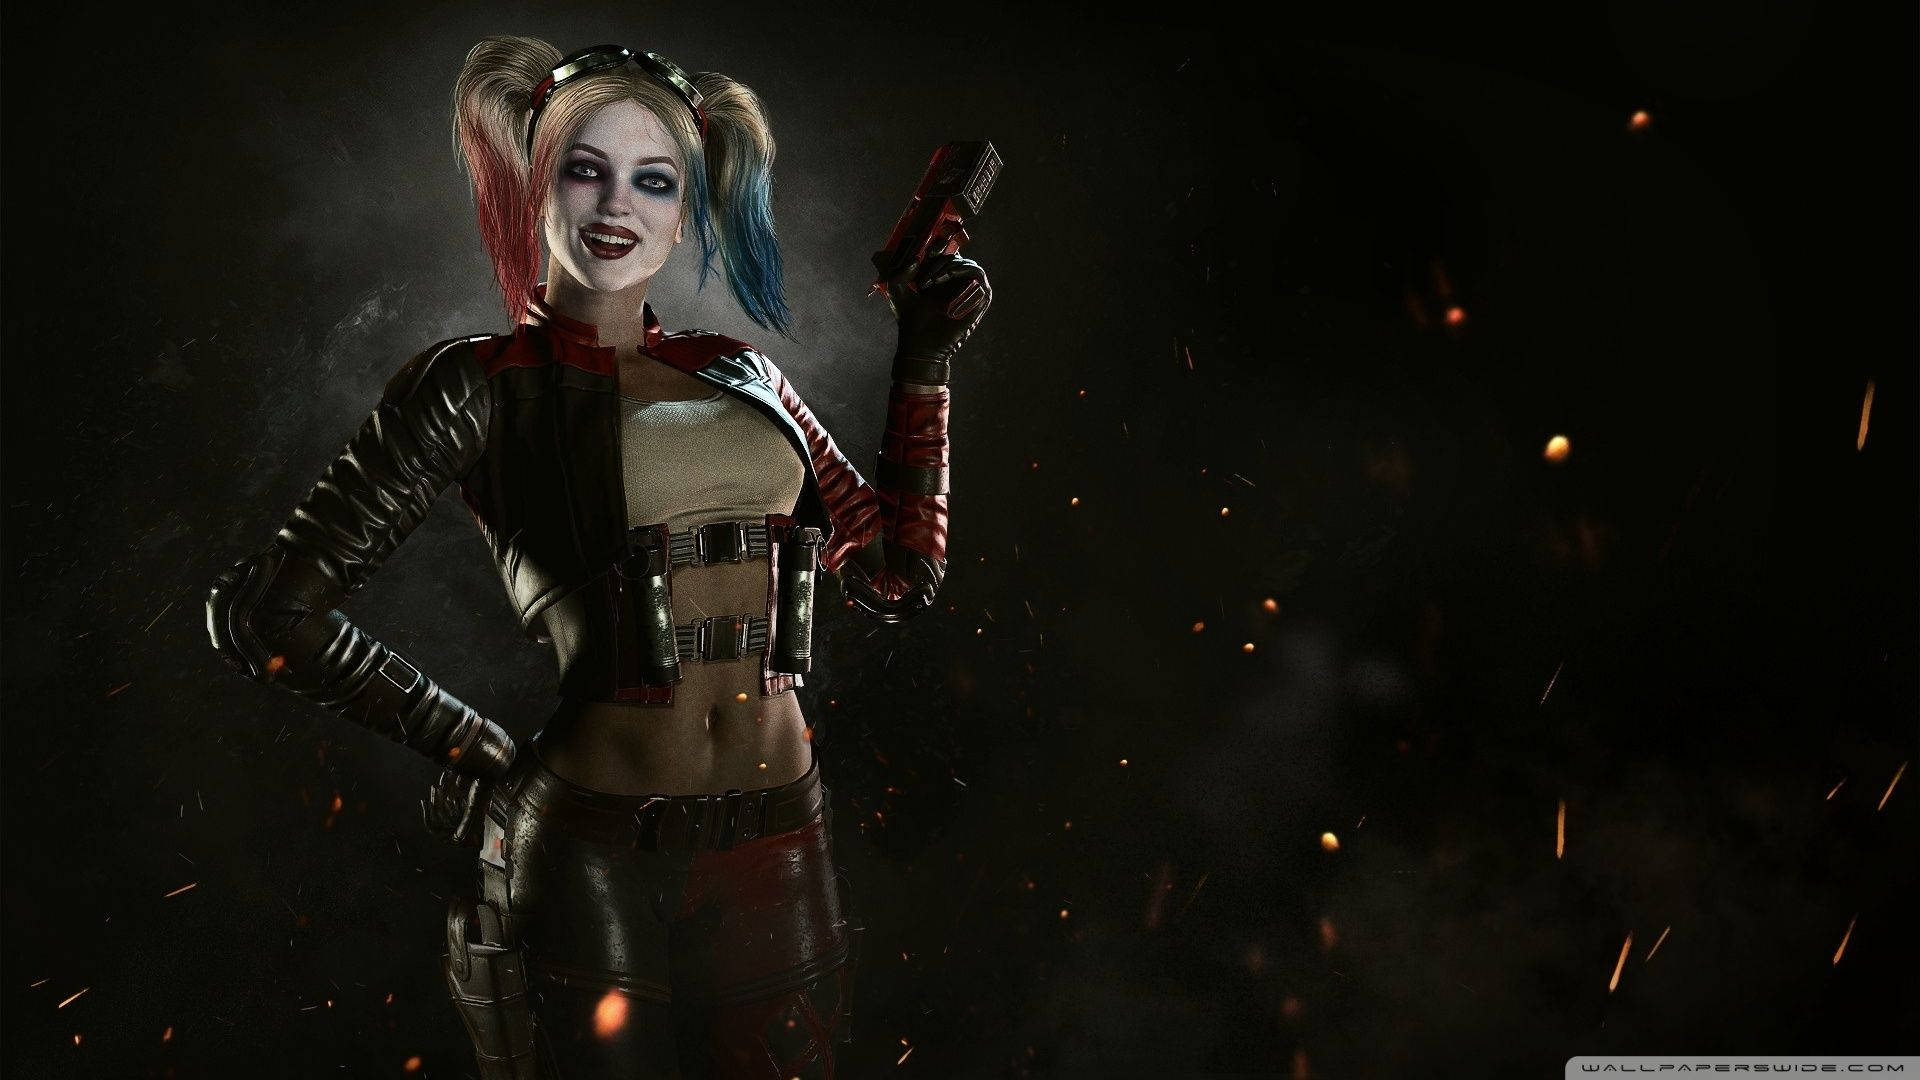 Revamped for Injustice 2, Harley Quinn brings her classic chaos back to the screen. Wallpaper